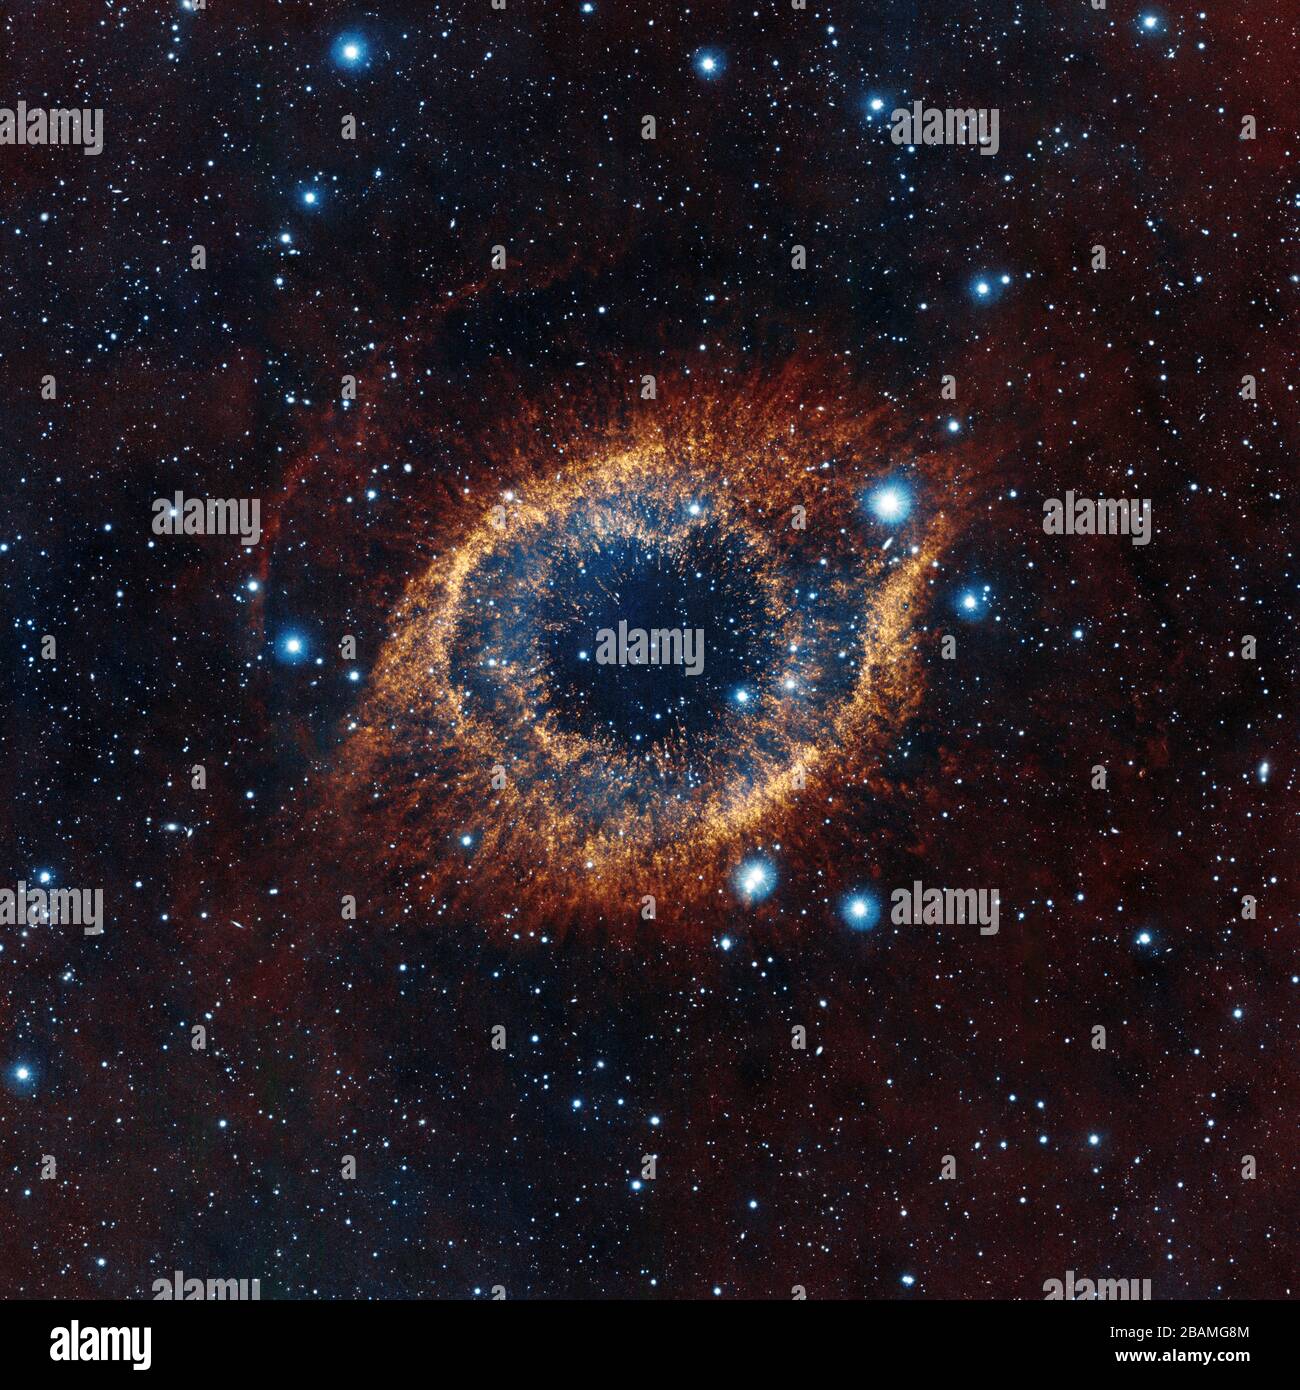 'English: ESO's Visible and Infrared Survey Telescope for Astronomy (VISTA) has captured this unusual view of the Helix Nebula (NGC 7293), a planetary nebula located 700 light-years away. The coloured picture was created from images taken through Y, J and K infrared filters. While bringing to light a rich background of stars and galaxies, the telescope's infrared vision also reveals strands of cold nebular gas that are mostly obscured in visible images of the Helix.; 19 January 2012, 12:00:00; http://www.eso.org/public/images/eso1205a/; ESO/VISTA/J. Emerson; ' Stock Photo